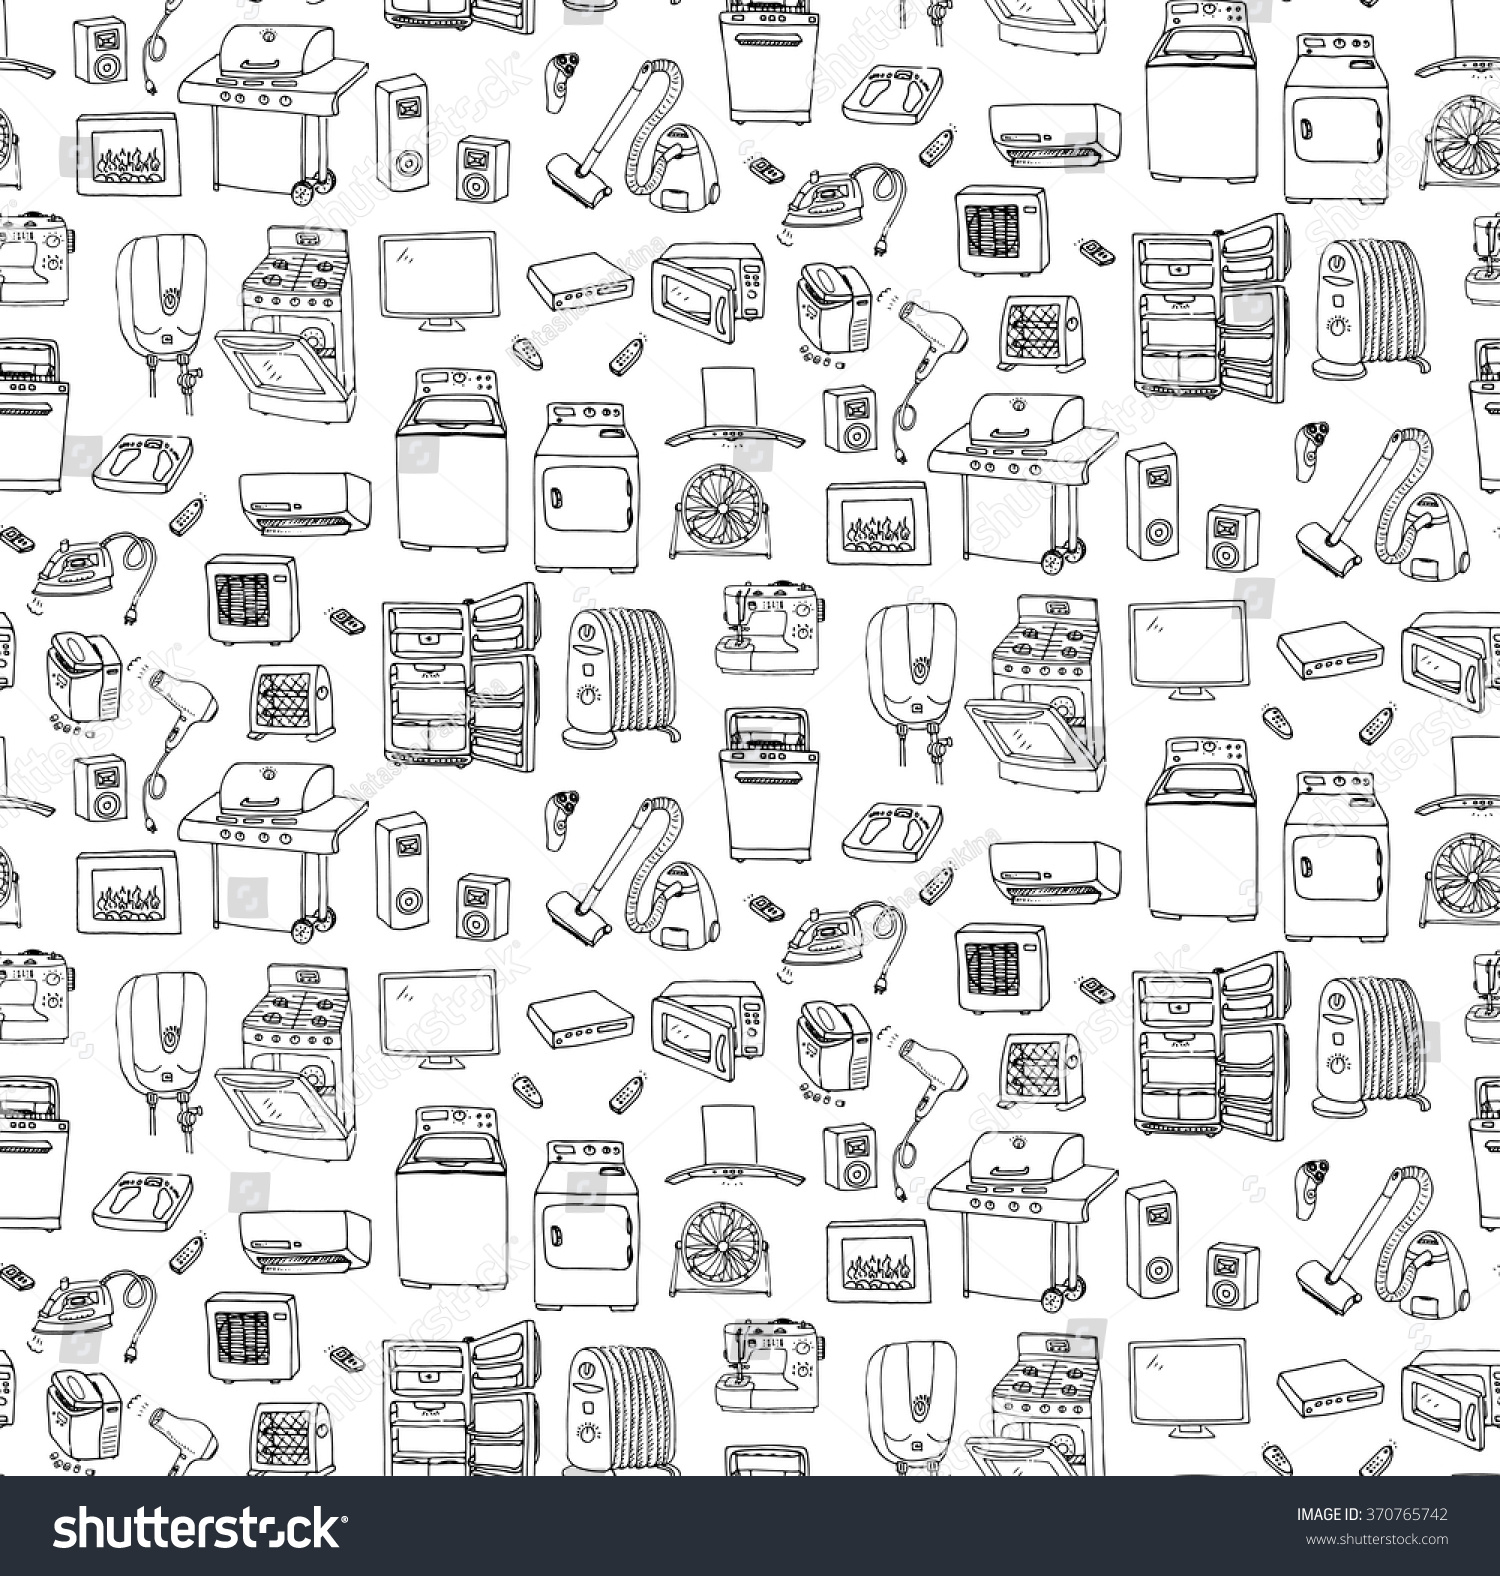 Seamless Background Hand Drawn Doodle Home Appliance Vector Illustration Cartoon Icons Set